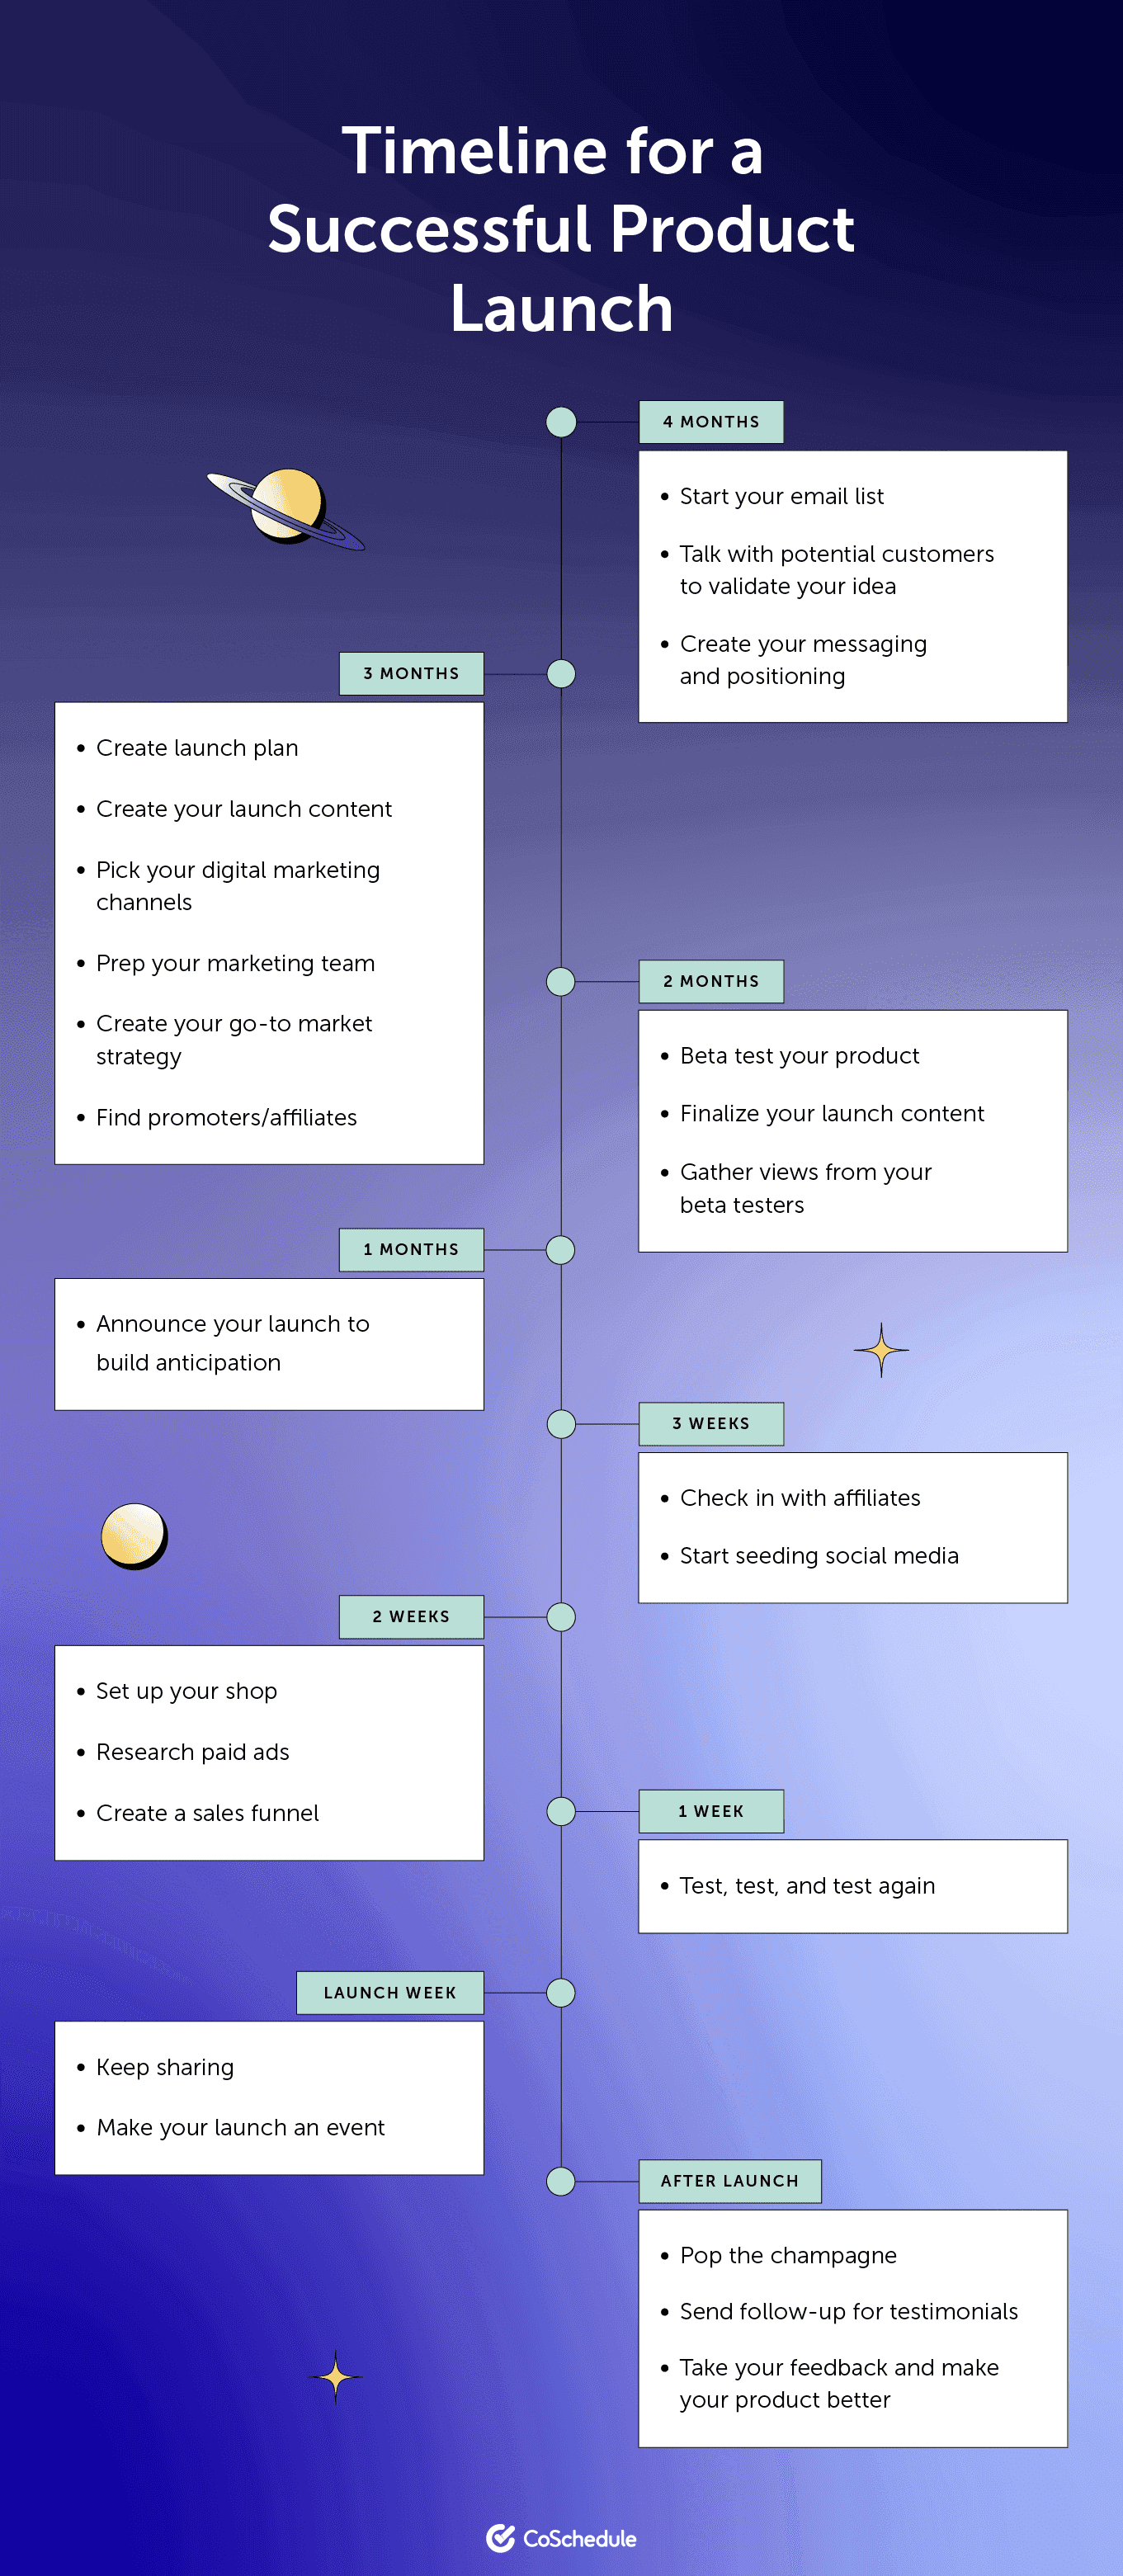 Timeline for a successful product launch